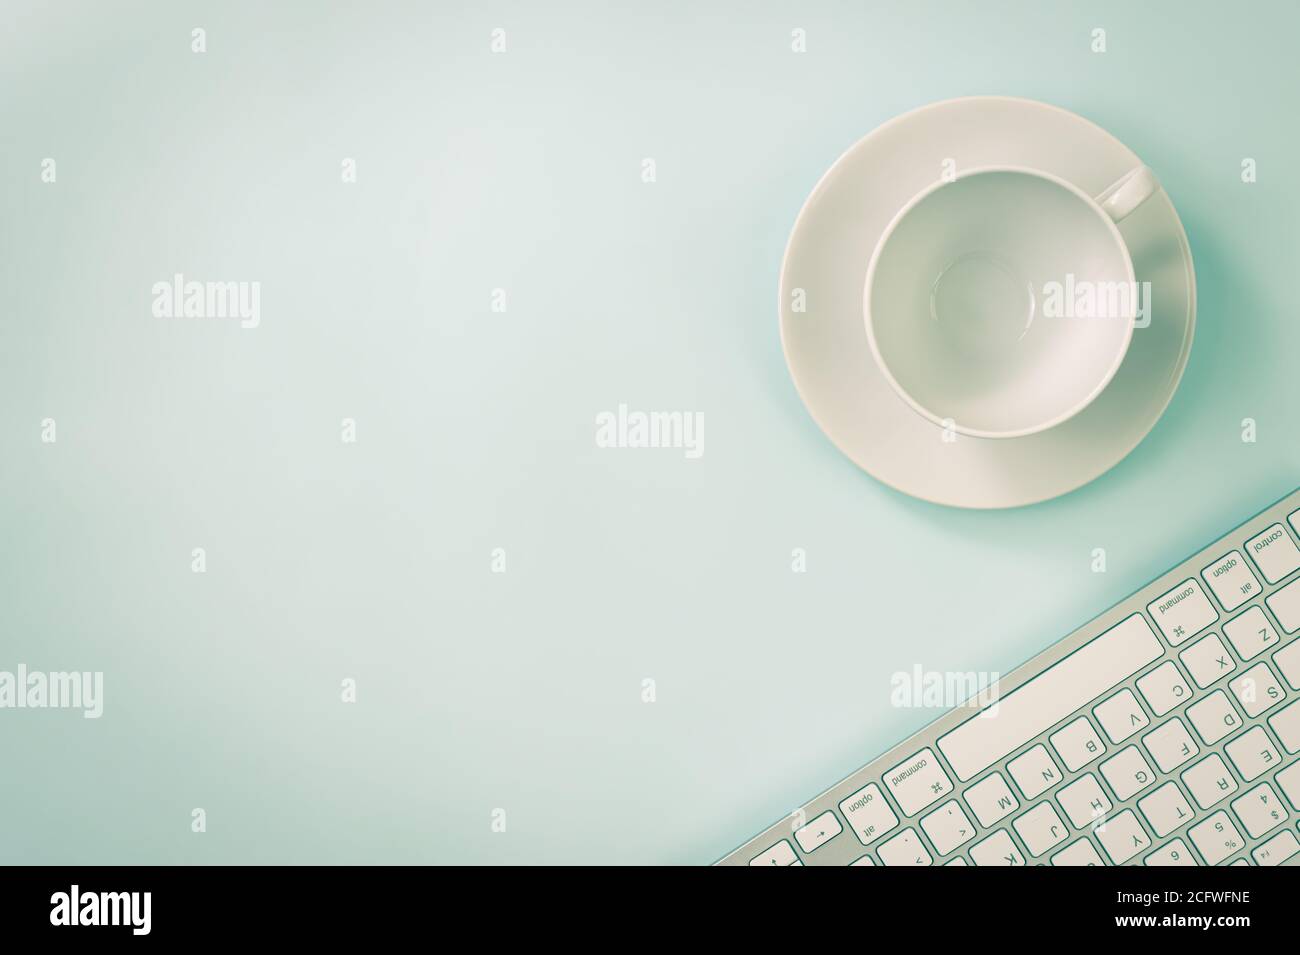 Coffee Cup and Computer Keyboard on Modern Clean Creative Office Desk or Office Table on Top View or Flat Lay. Blue Workspace Minimalist Background Stock Photo